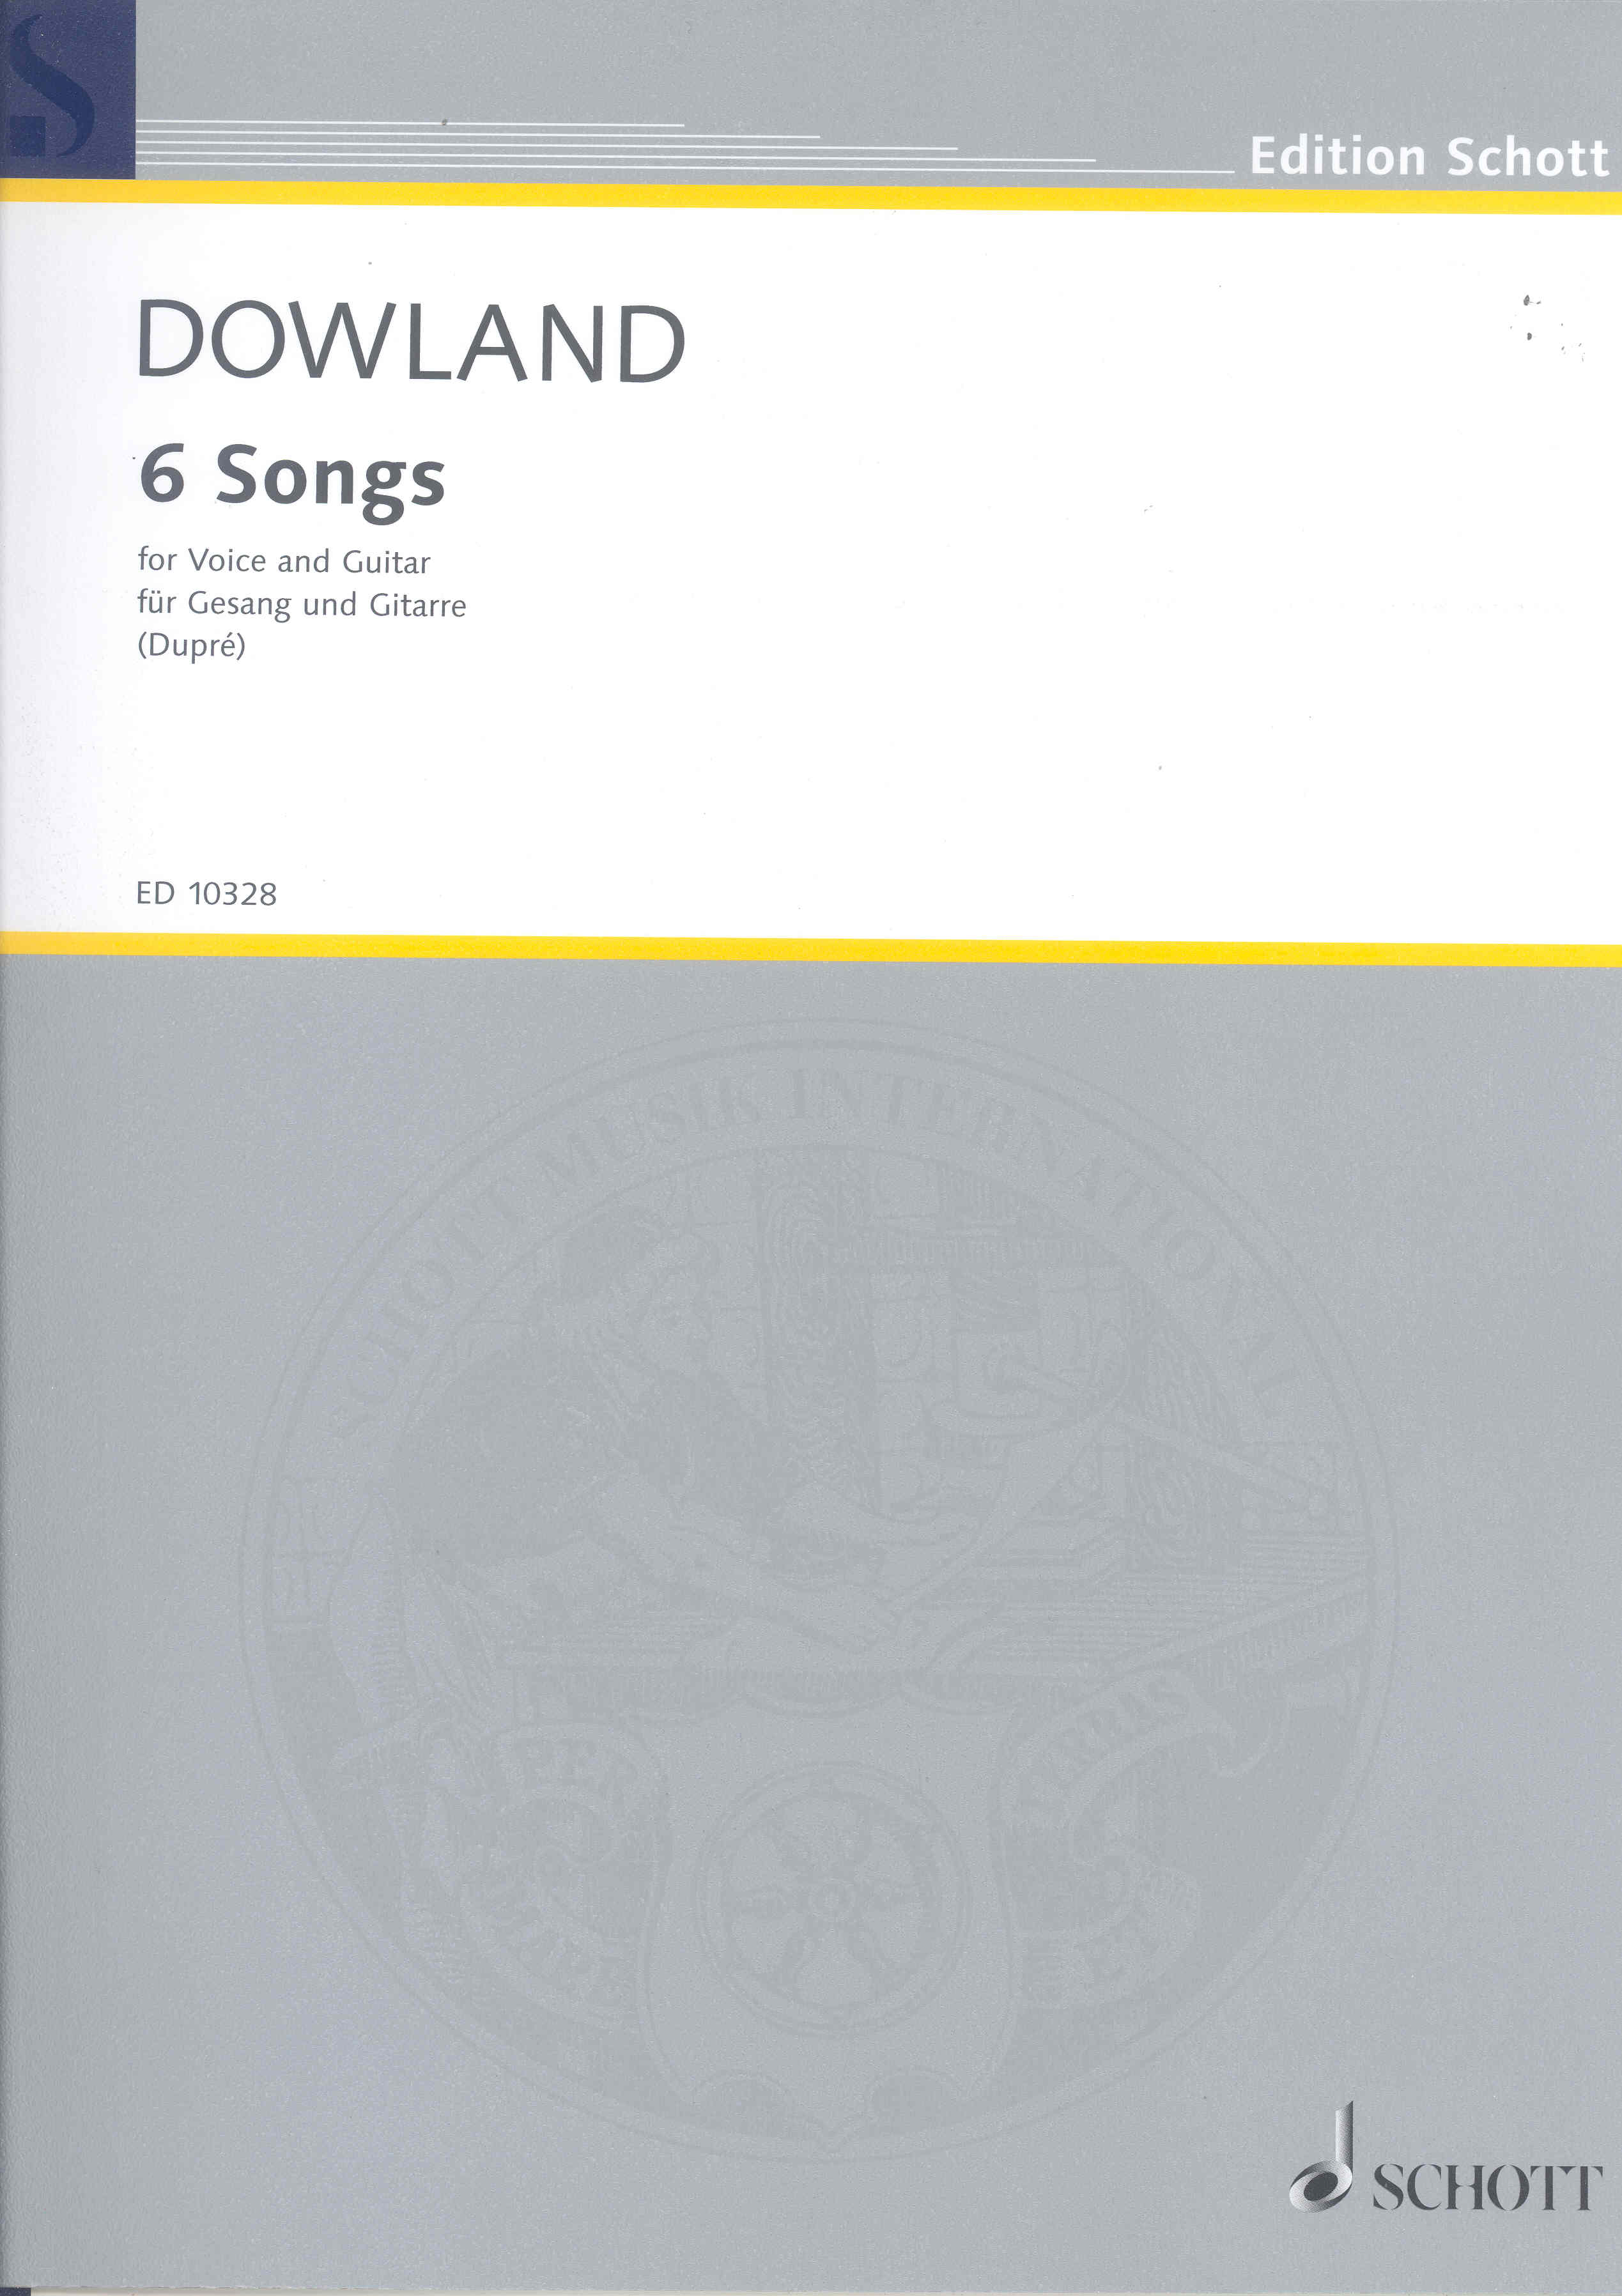 Dowland 6 Songs Voice And Guitar Sheet Music Songbook